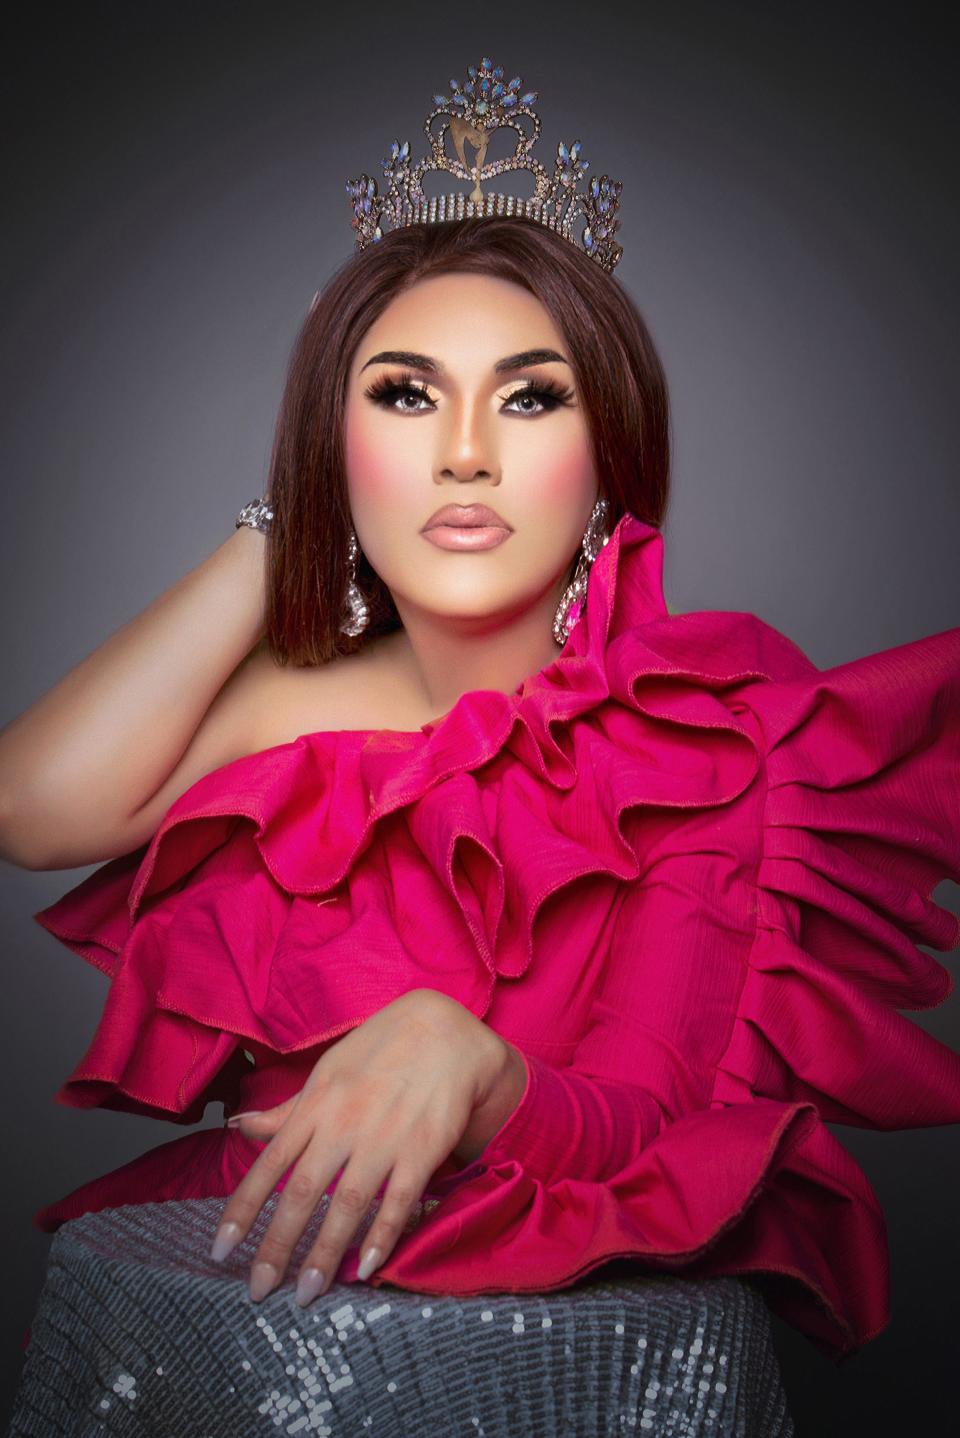 Reigning Miss Gay Arizona America Sicarya Seville will step down during the statewide Miss Gay Arizona America pageant on June 25, 2022.